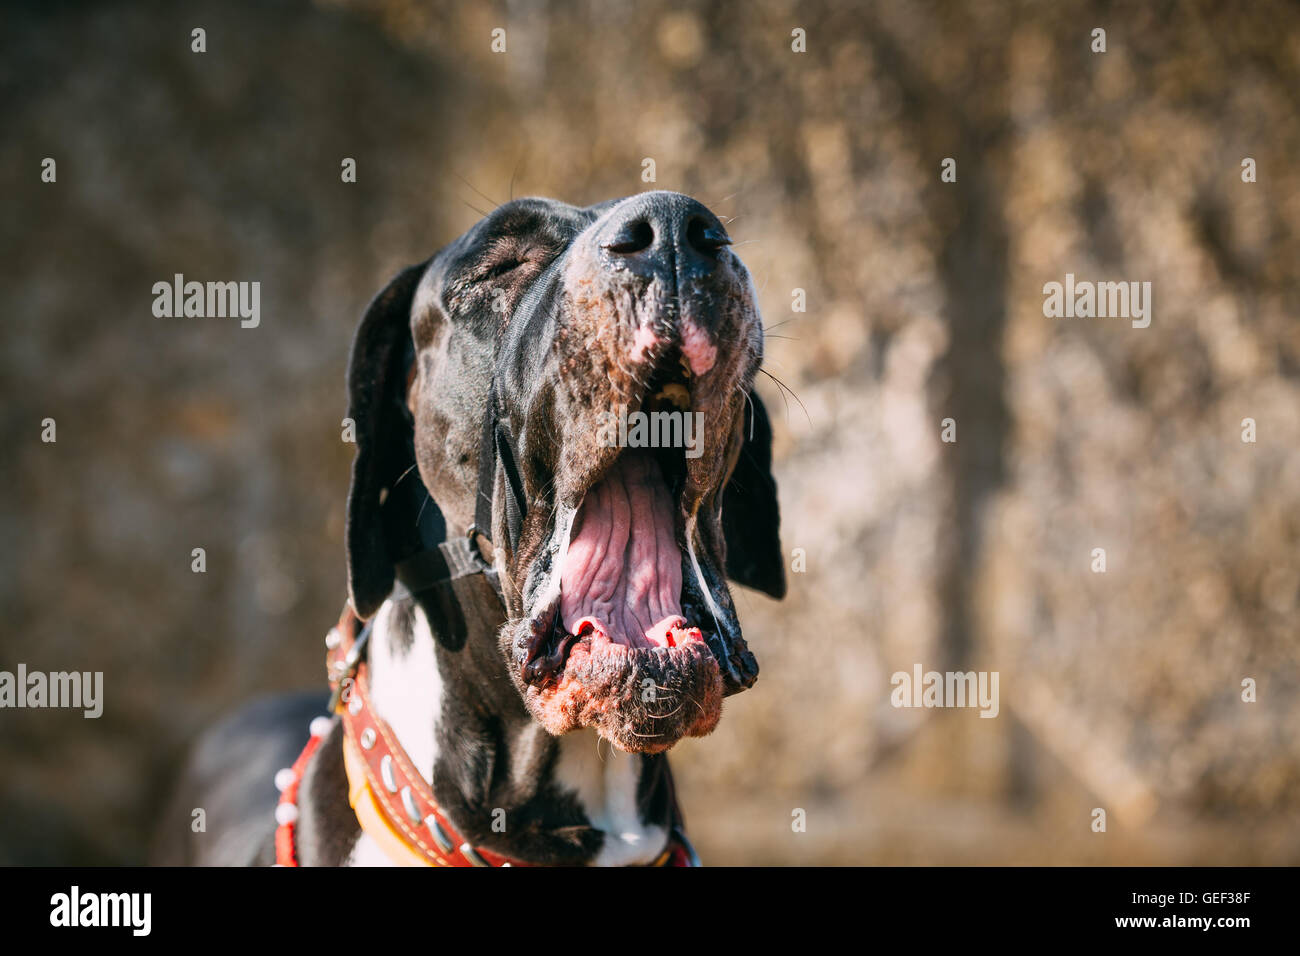 The Great Dane Is A Large German Breed Of Domestic Dog - Canis Lupus Familiaris Known For Its Enormous Body And Great Height. Stock Photo